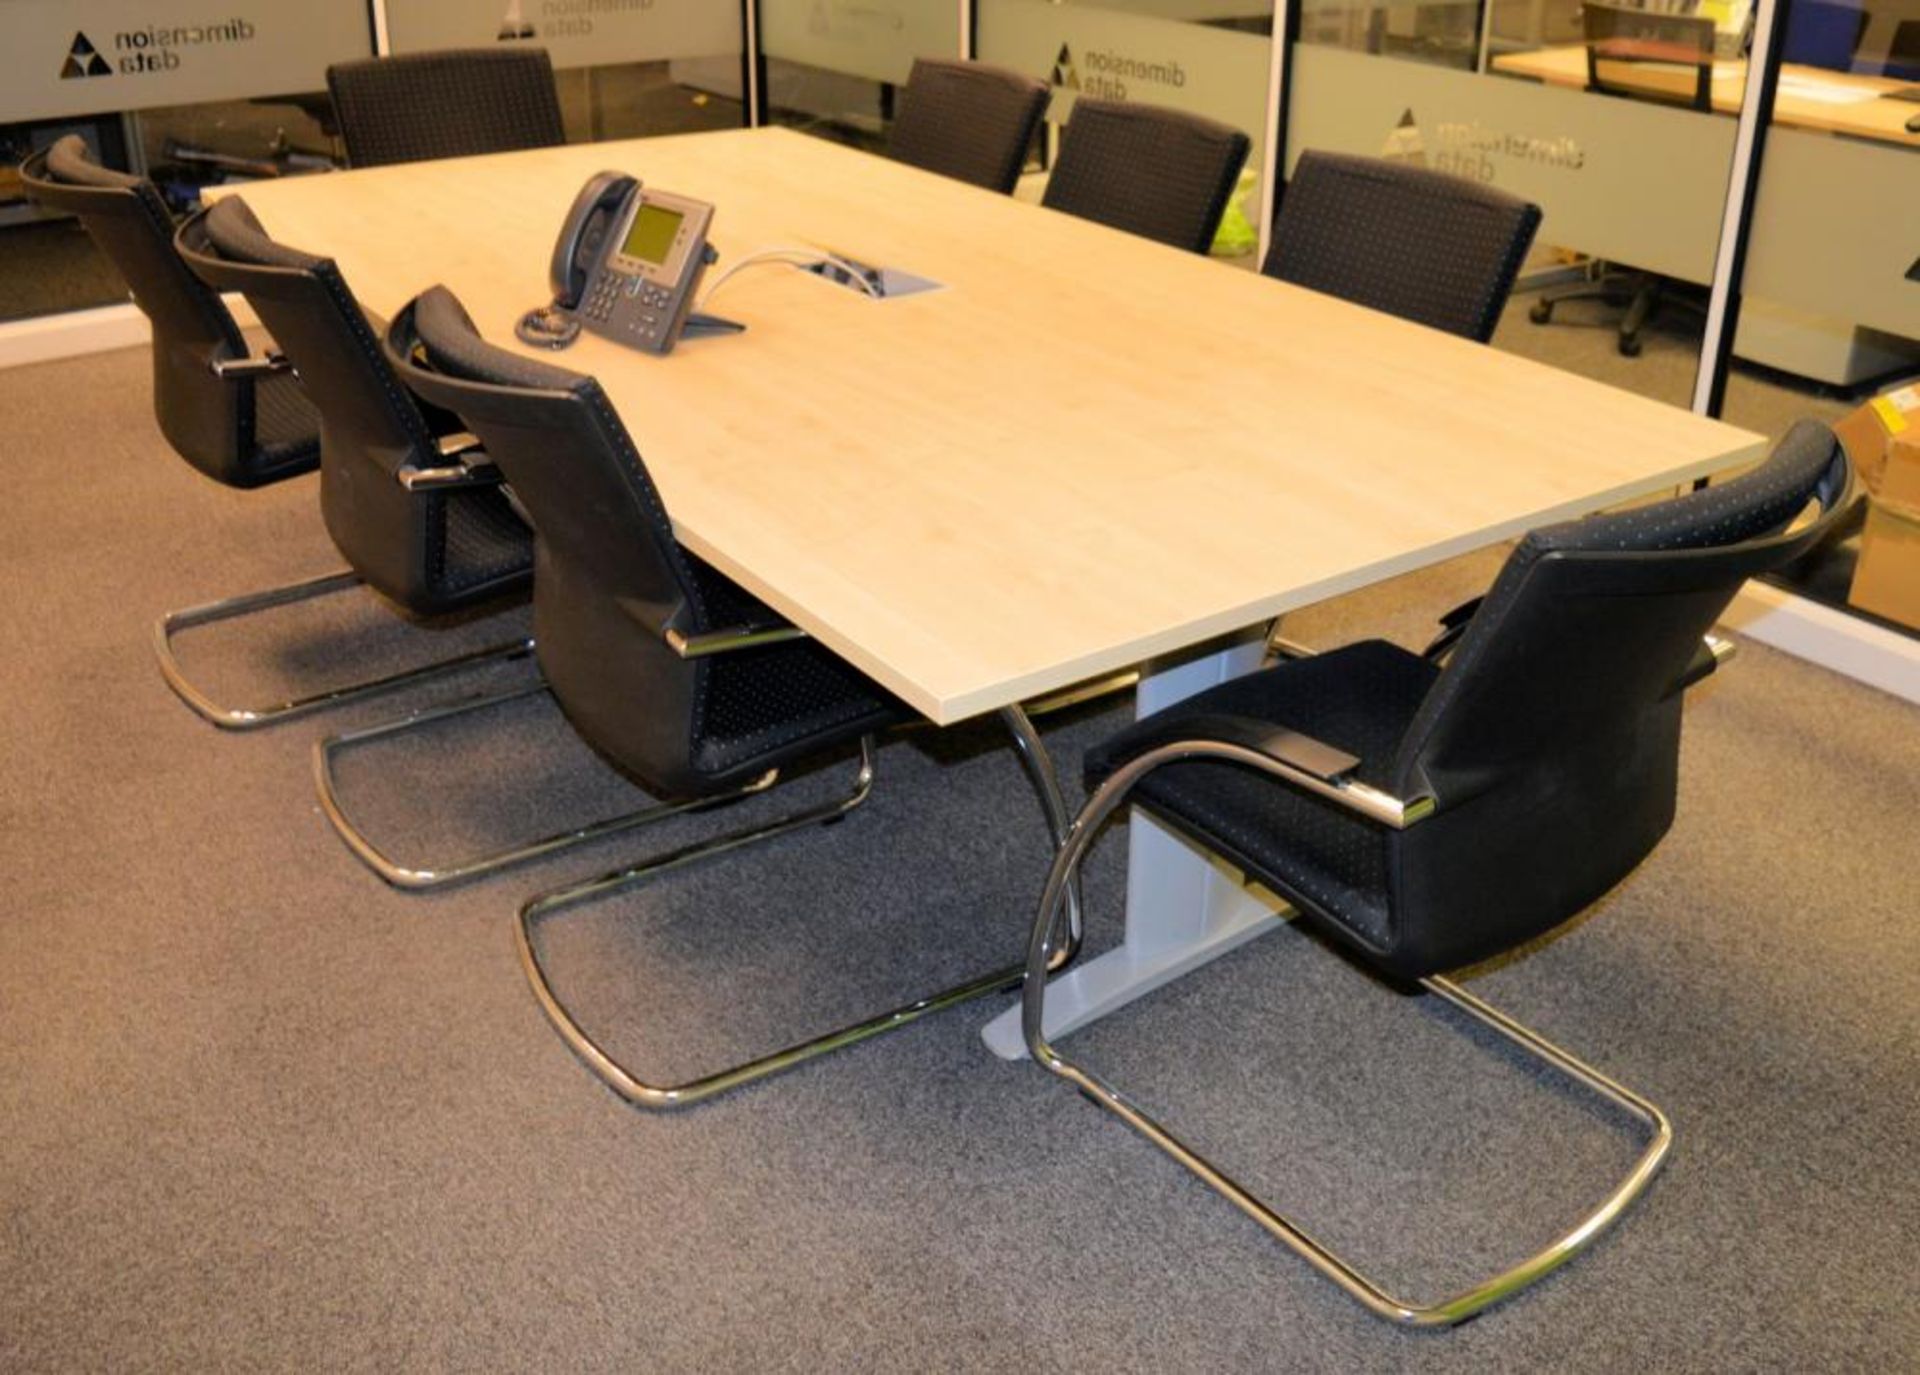 8 x Stackable Boardroom Meeting Chairs in Black With Chrome Stands and Arm Rests - Contemporary - Image 5 of 7